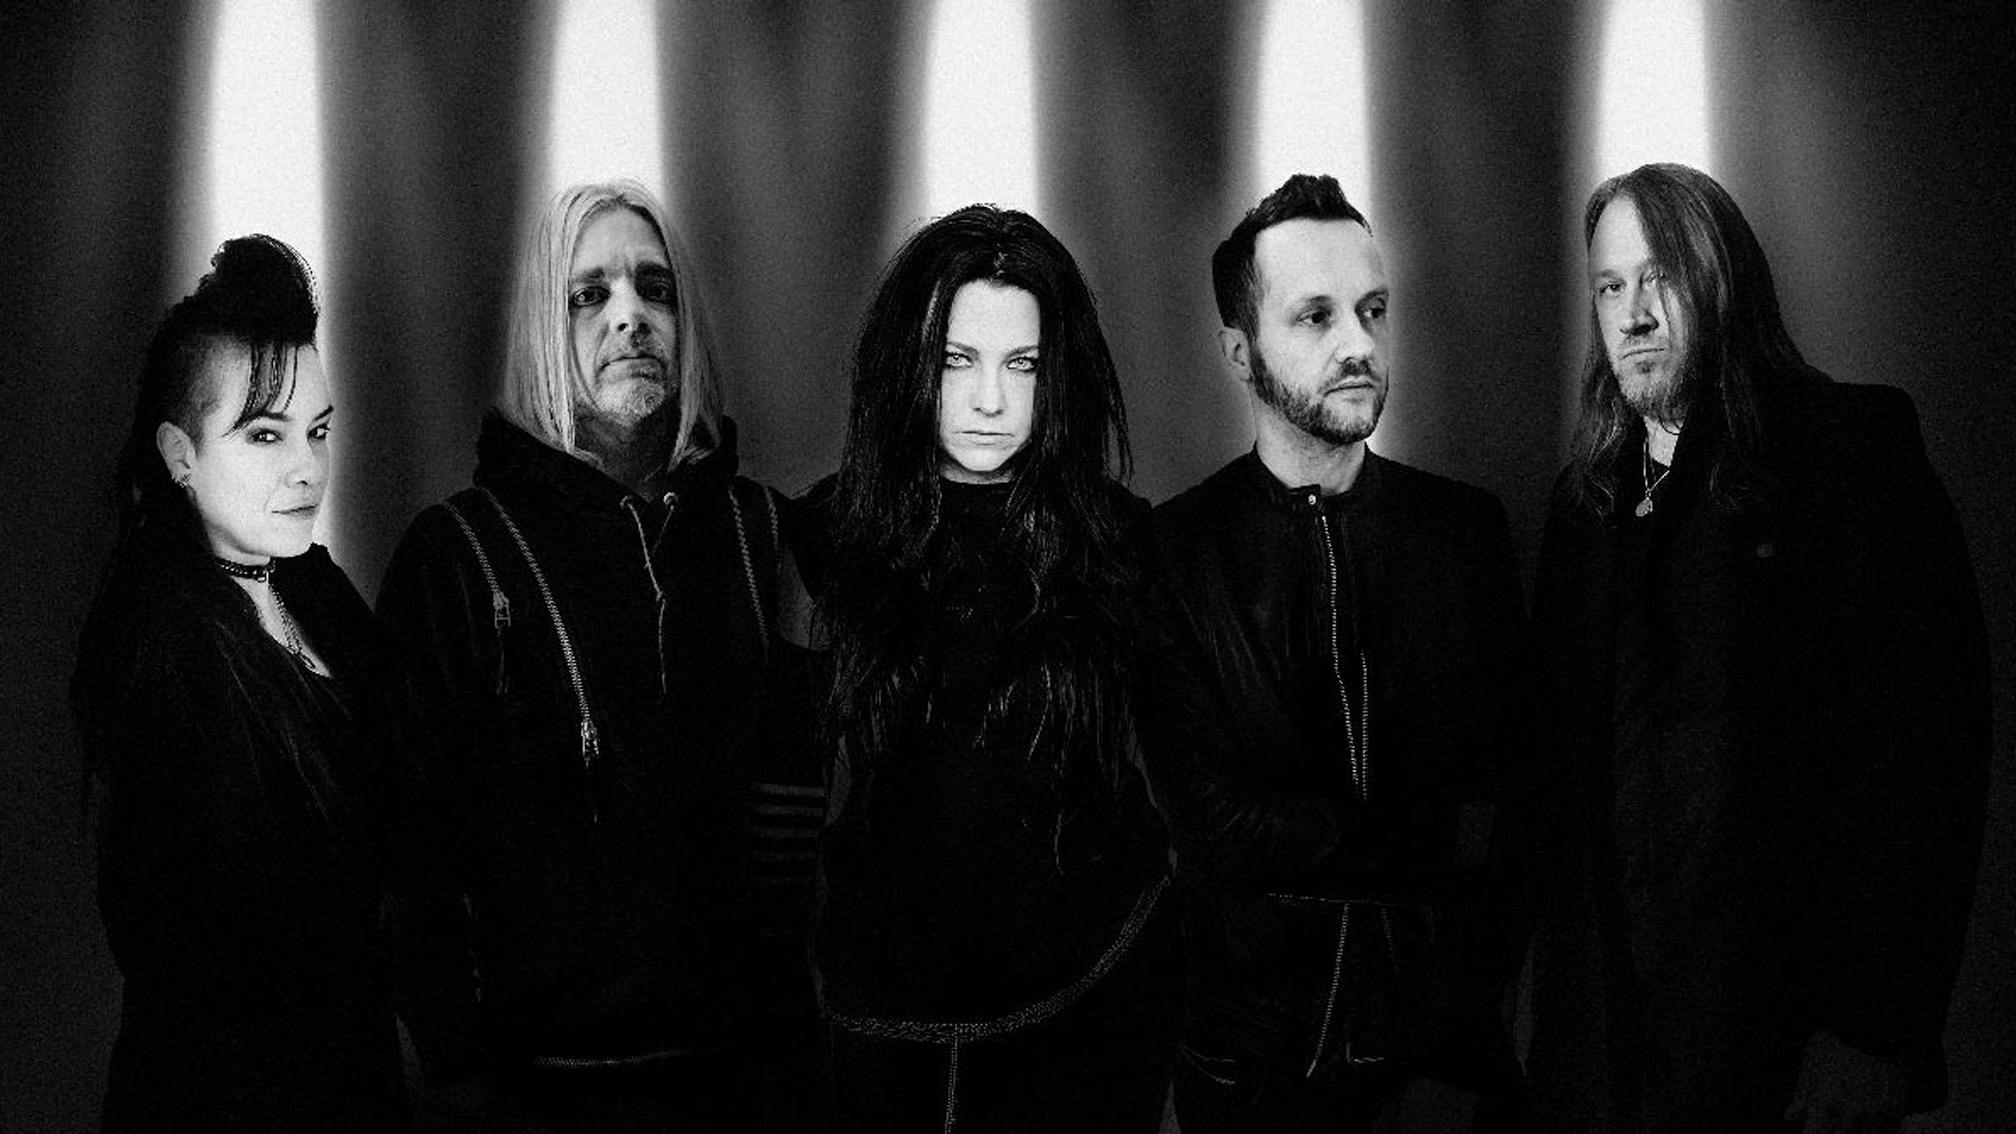 Listen to Evanescence's empowering new single, Better Without You